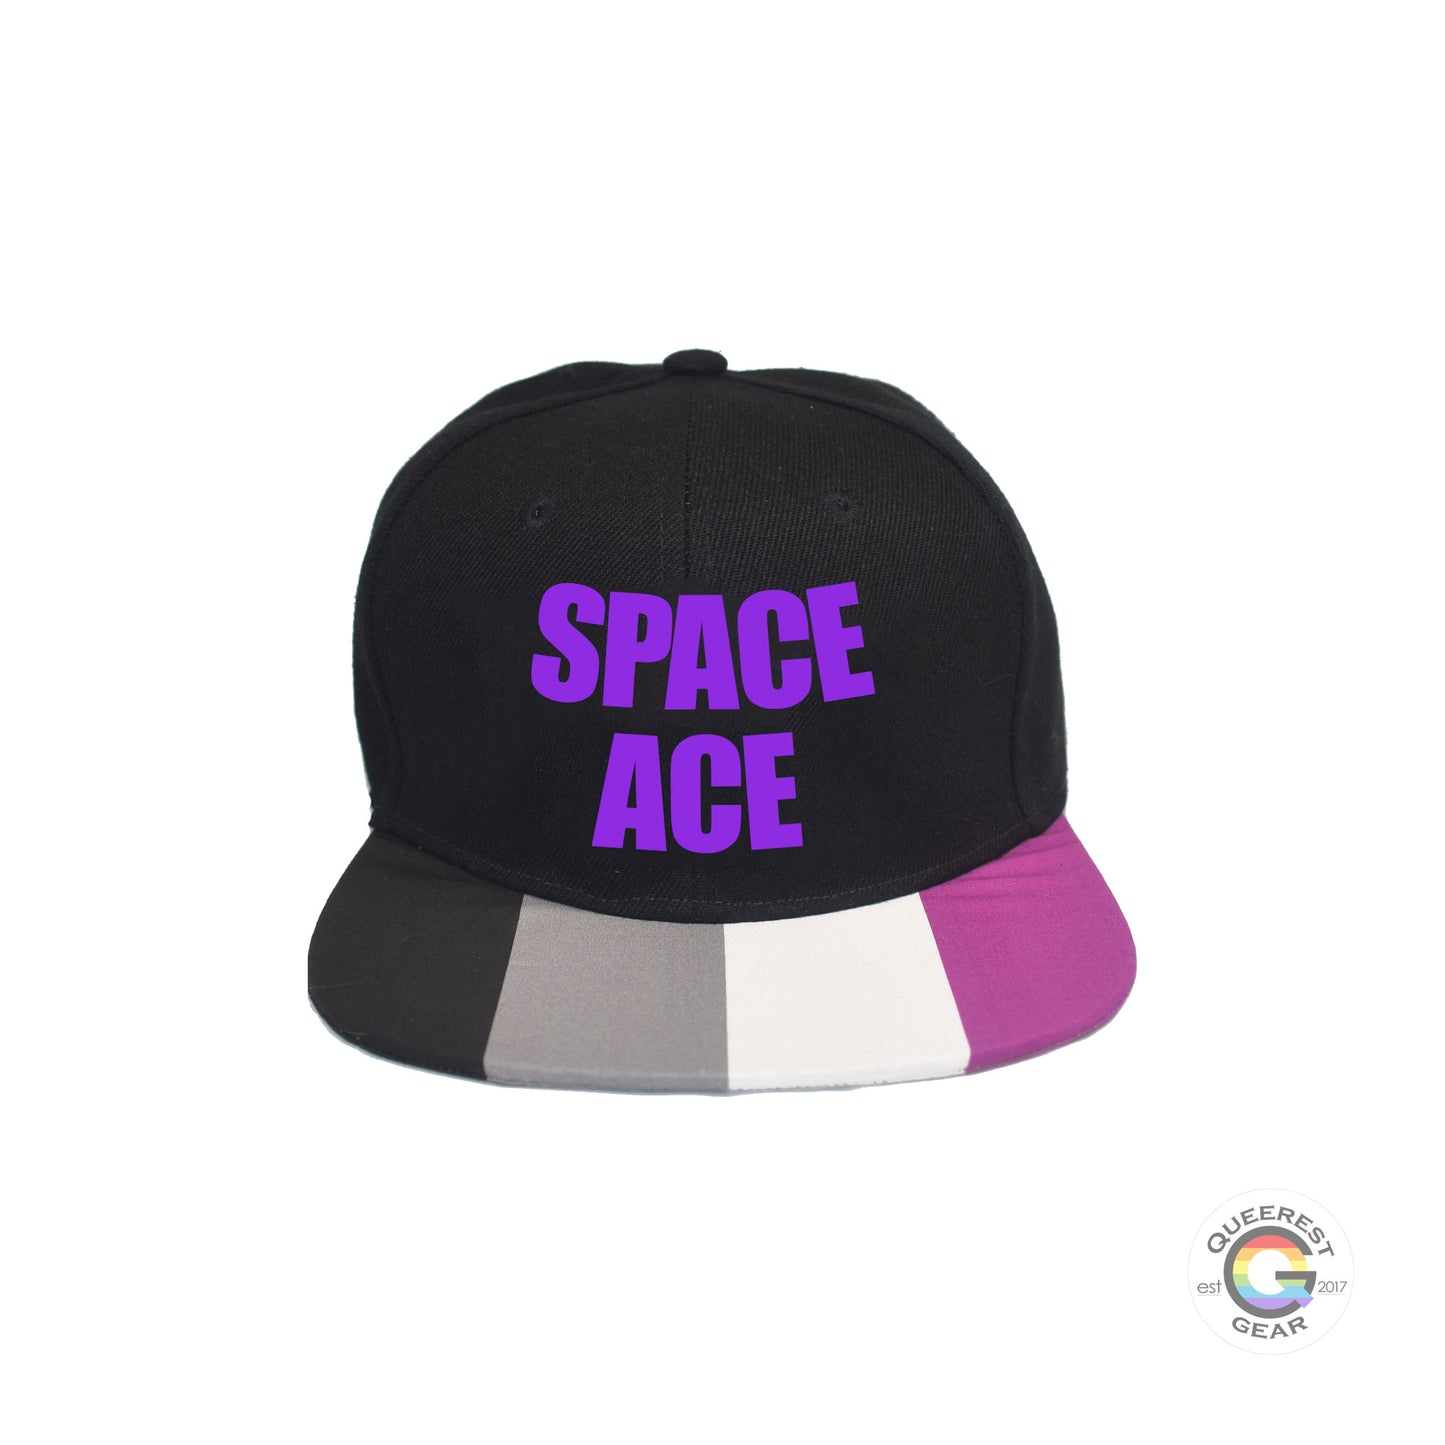 Custom black flat bill snapback hat. The brim has the asexual pride flag on both sides and the front of the hat has the phrase “space ace” in purple. Front view